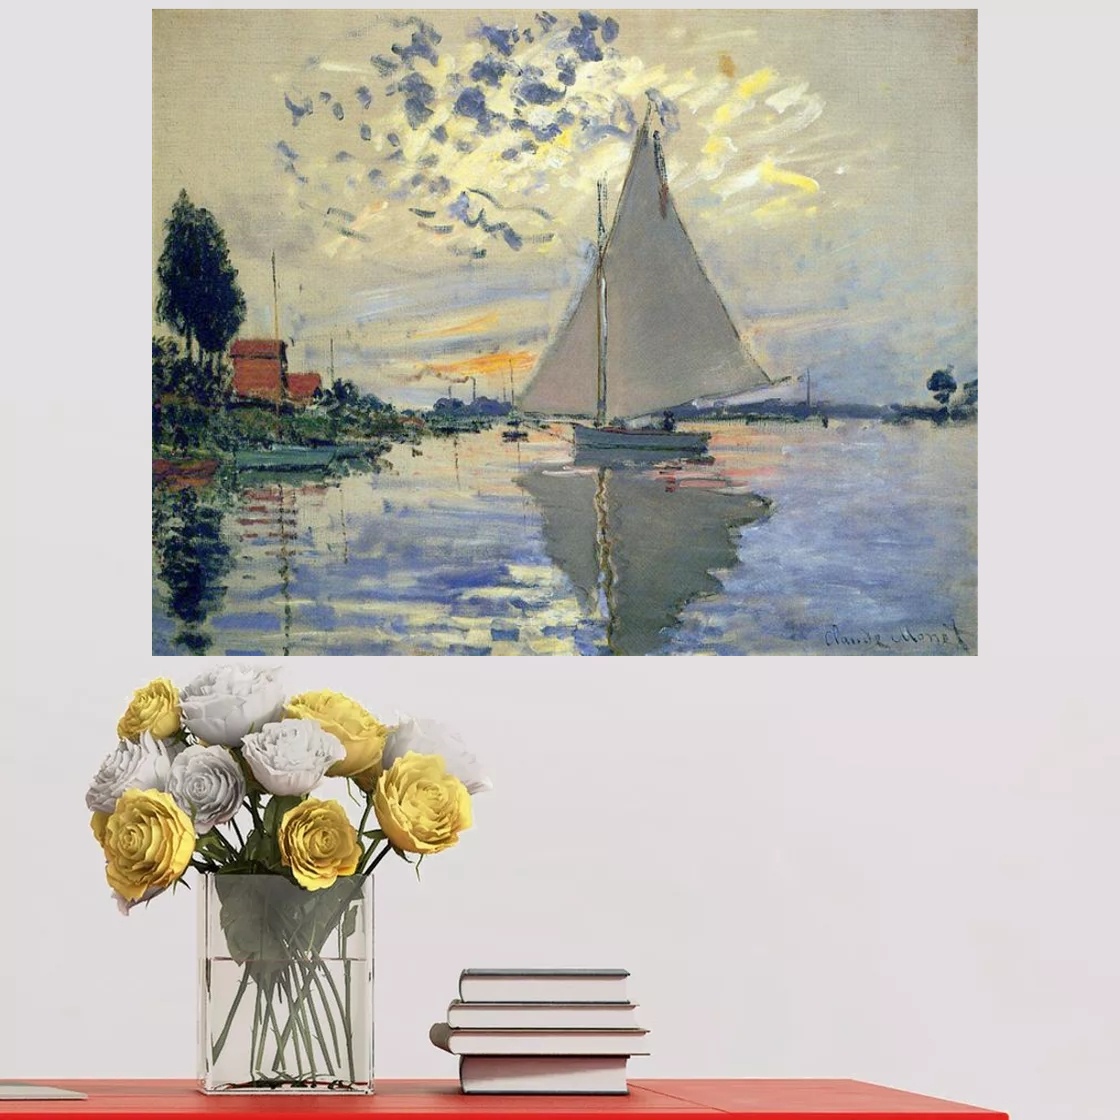 Sailboat at Le Petit-Gennevilliers by Claude Monet Painting on Canvas Replica Landscape Oil Art for Office Room Decoration Handpainted Impressionism